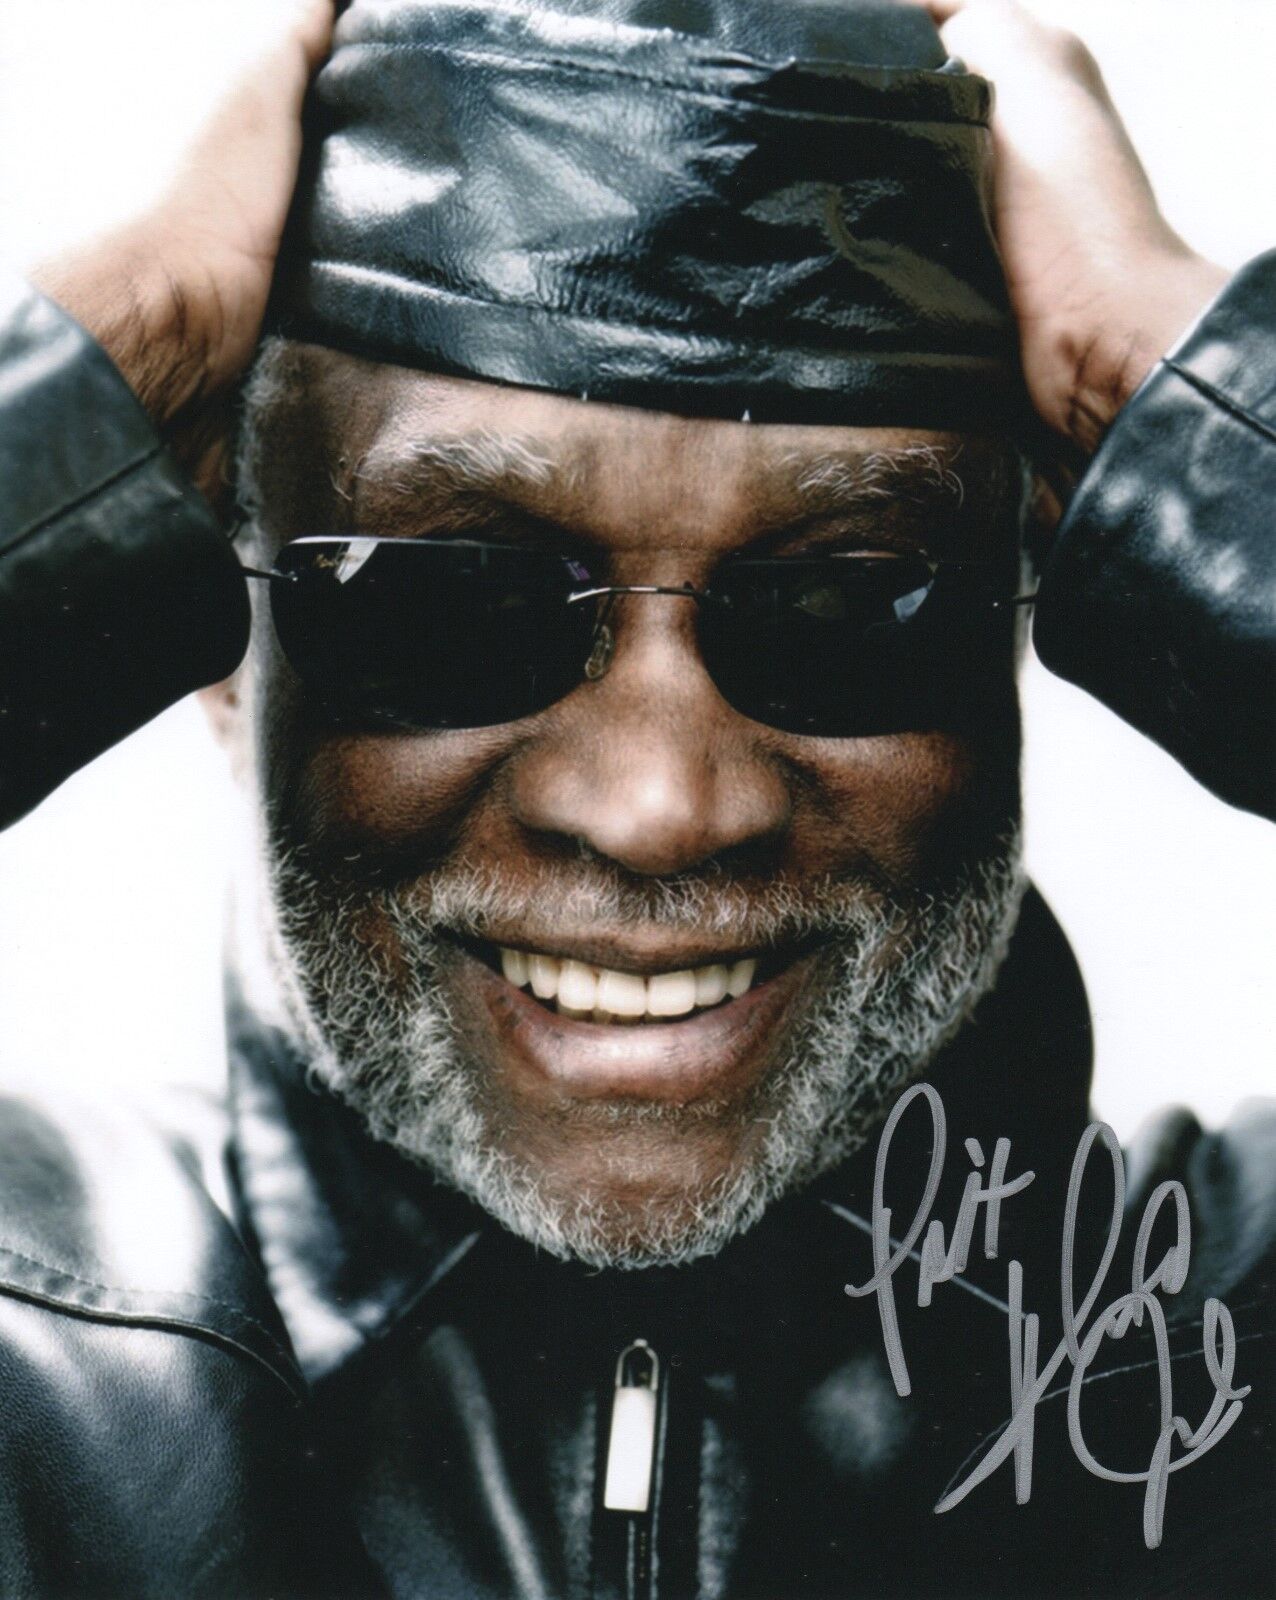 Ahmad Jamal pianist REAL hand SIGNED 8x10 Photo Poster painting #2 Autographed COA